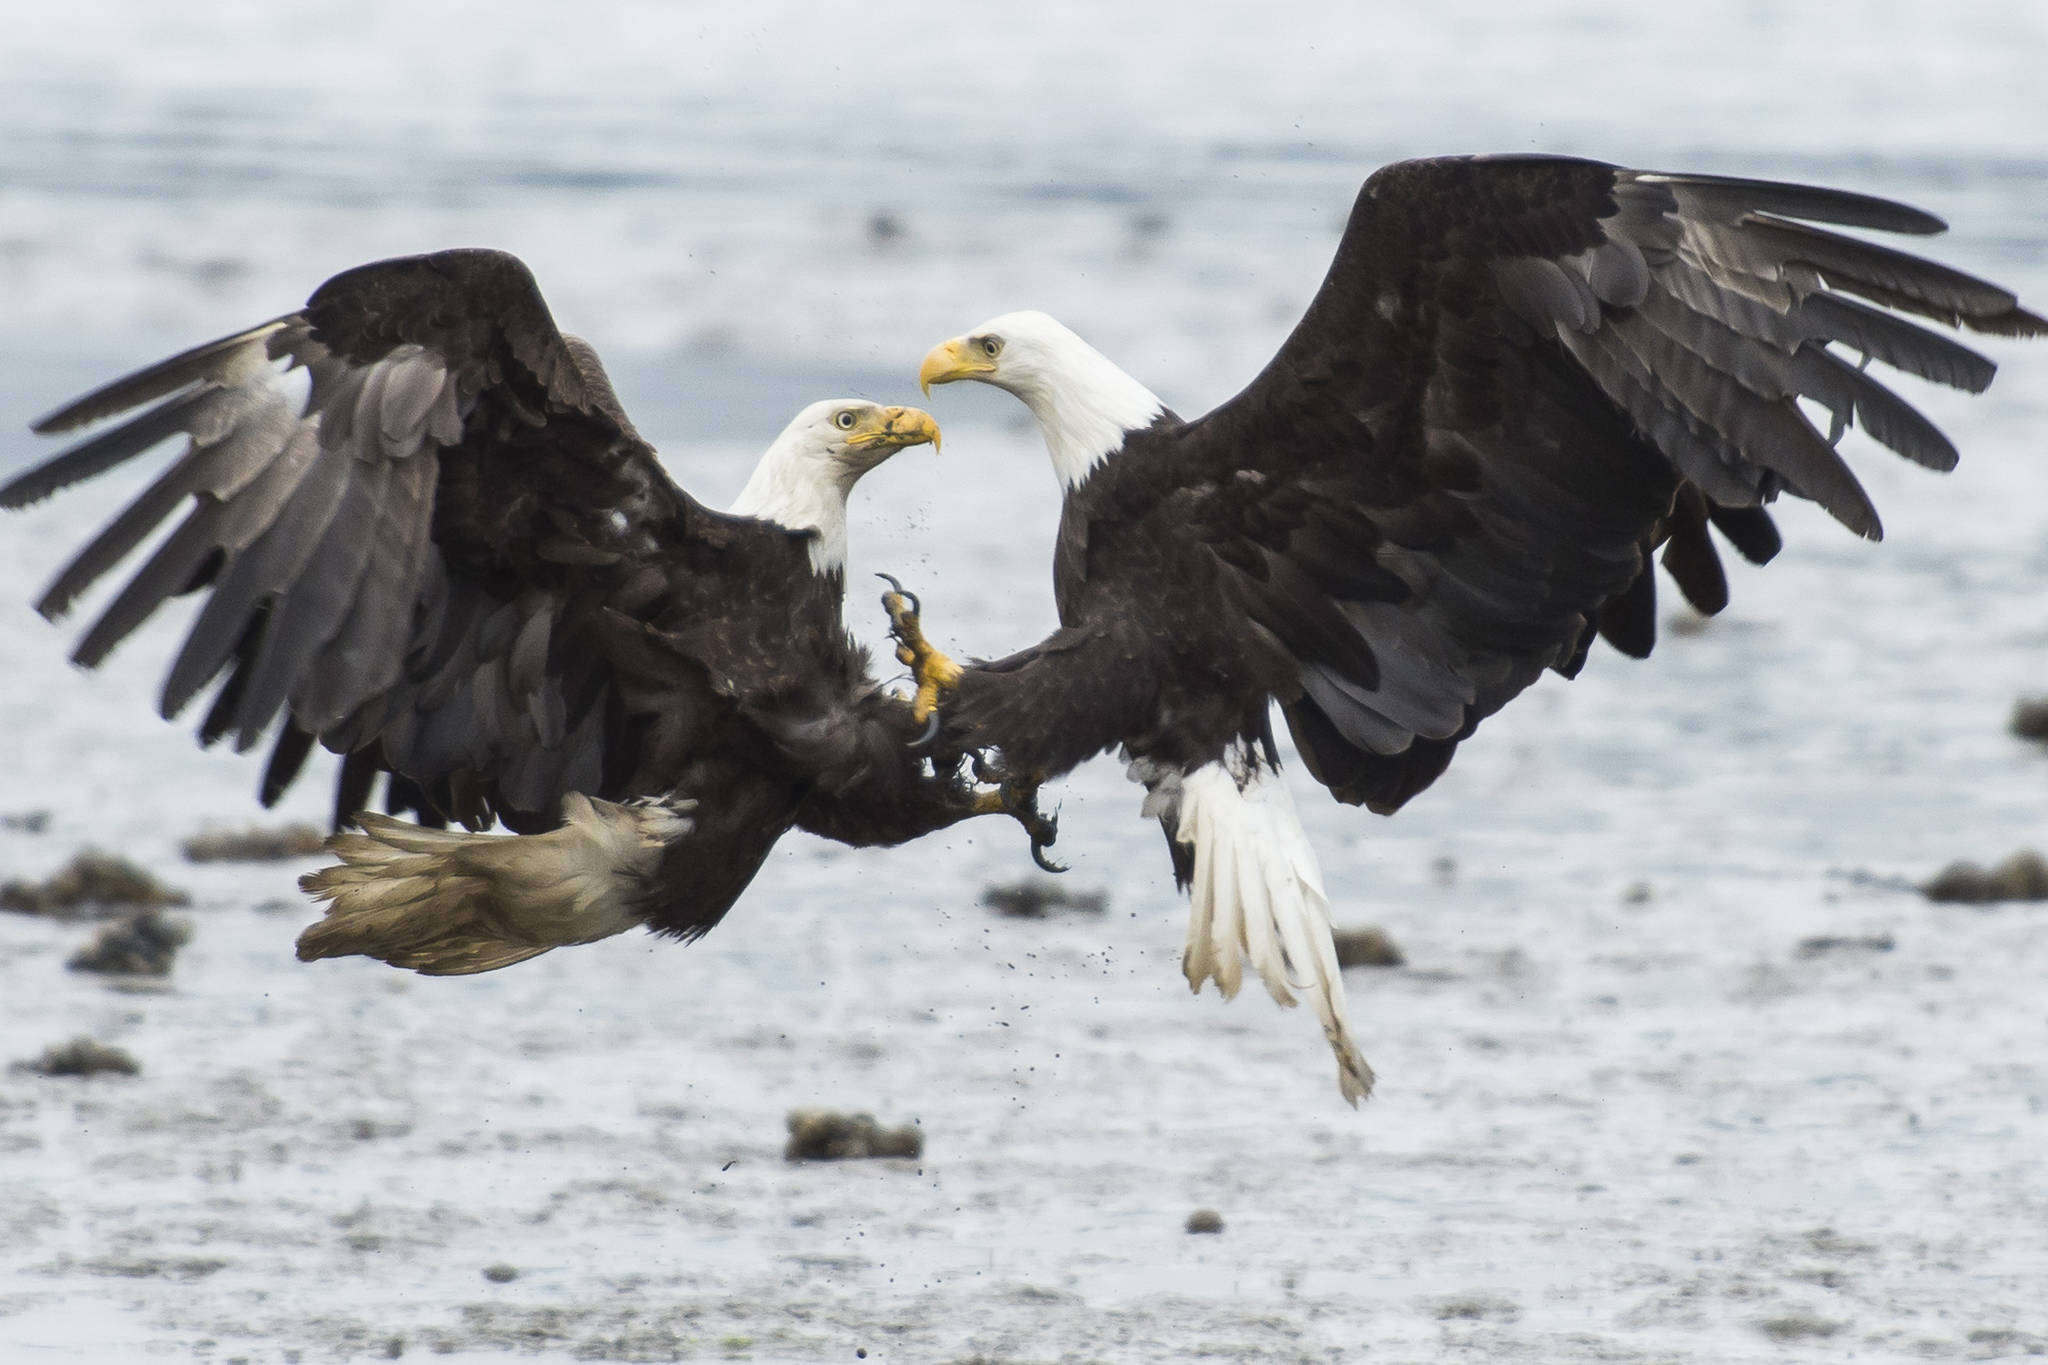 Bald eagles fight over salmon on the outgoing tide near the Macaulay Salmon Hatchery on Tuesday, July 17, 2018. (Michael Penn | Juneau Empire File)